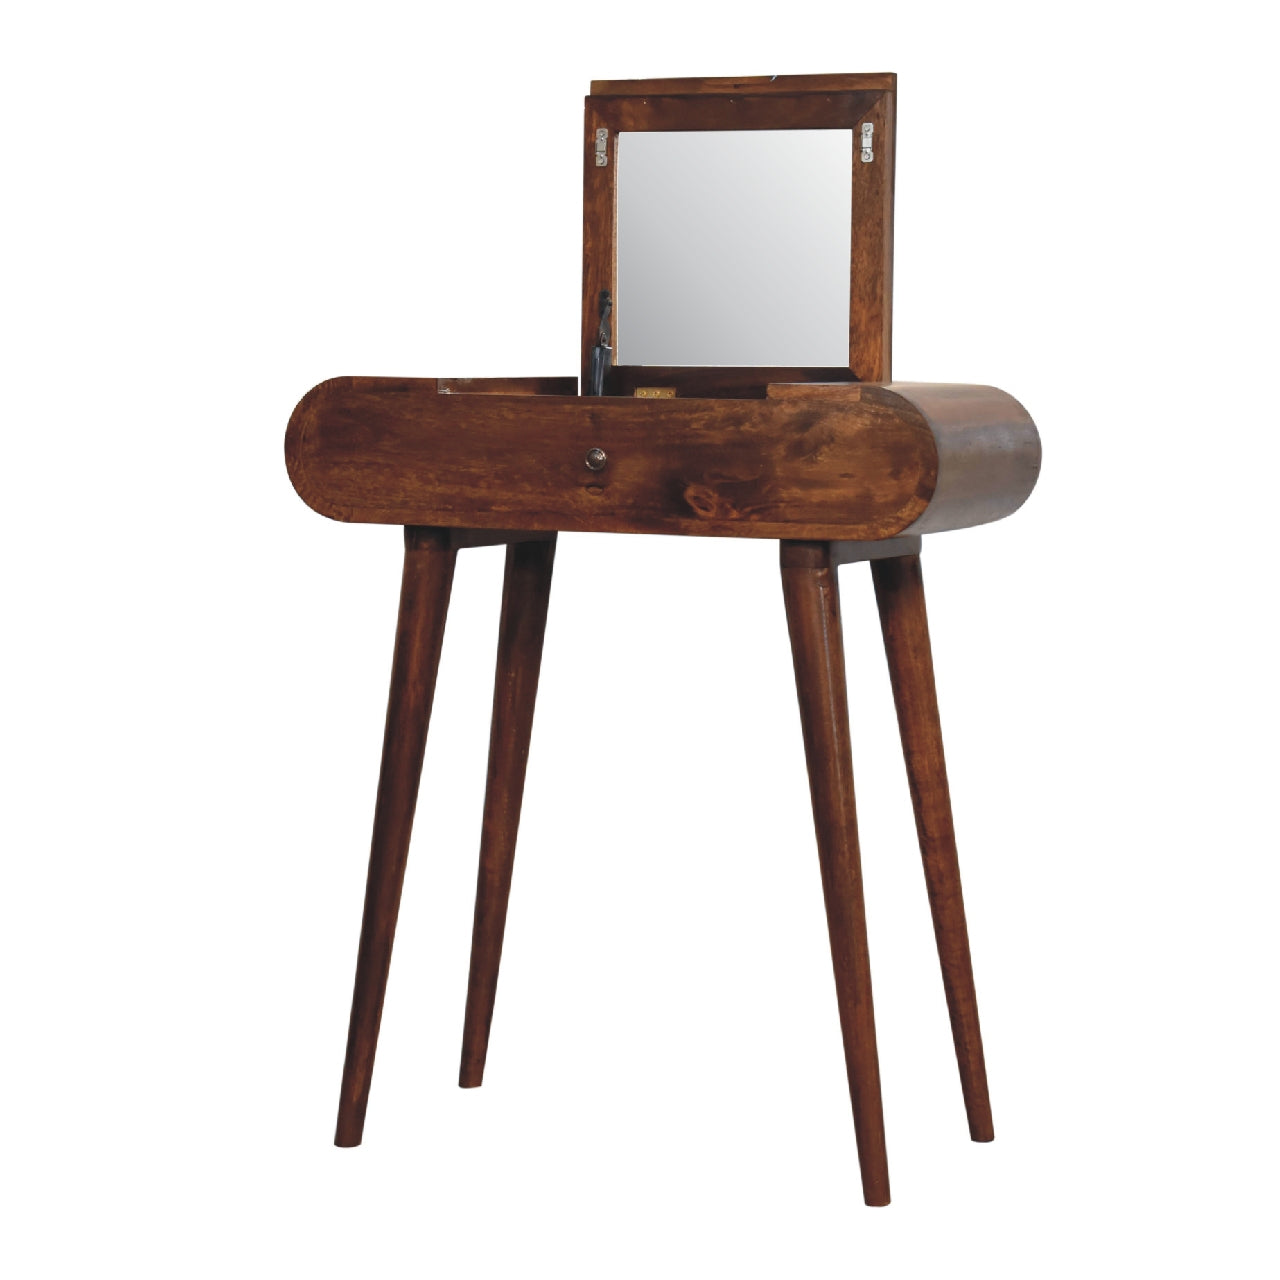 Mini Chestnut Dressing Table with Foldable Mirror - CasaFenix